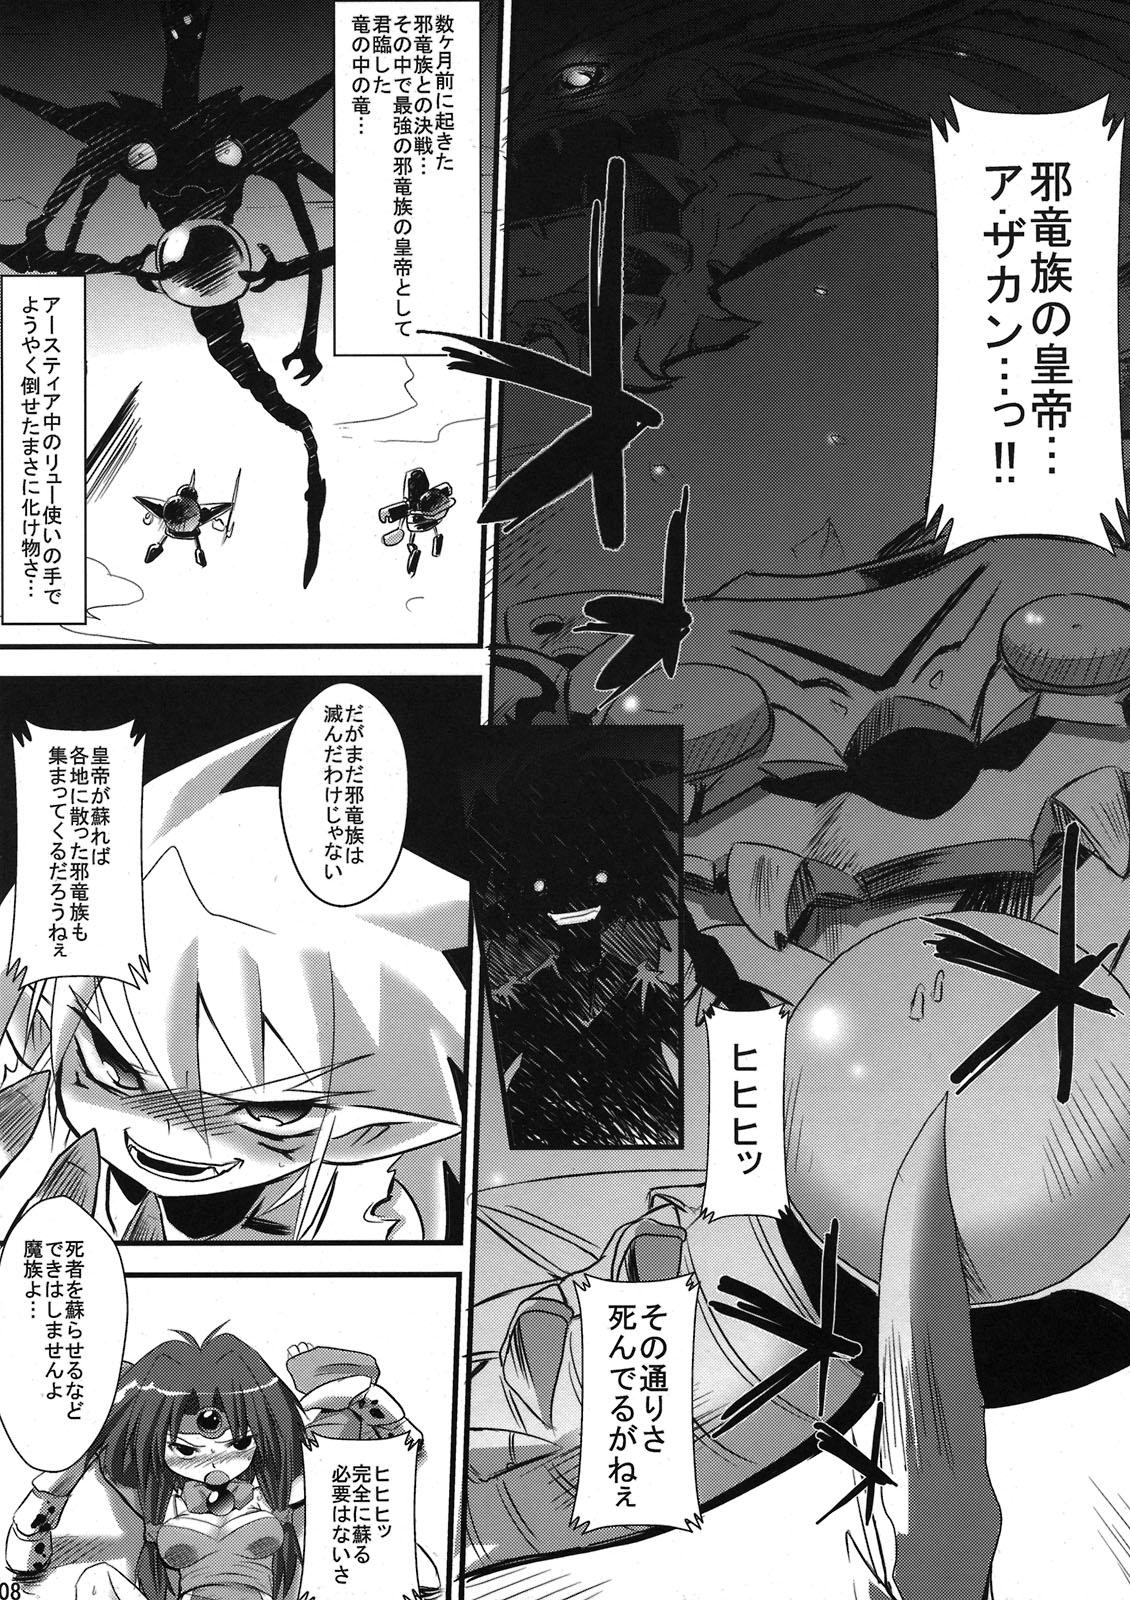 Deflowered Toraware no Madouhime Joukan - Lord of lords ryu knight Flashing - Page 8